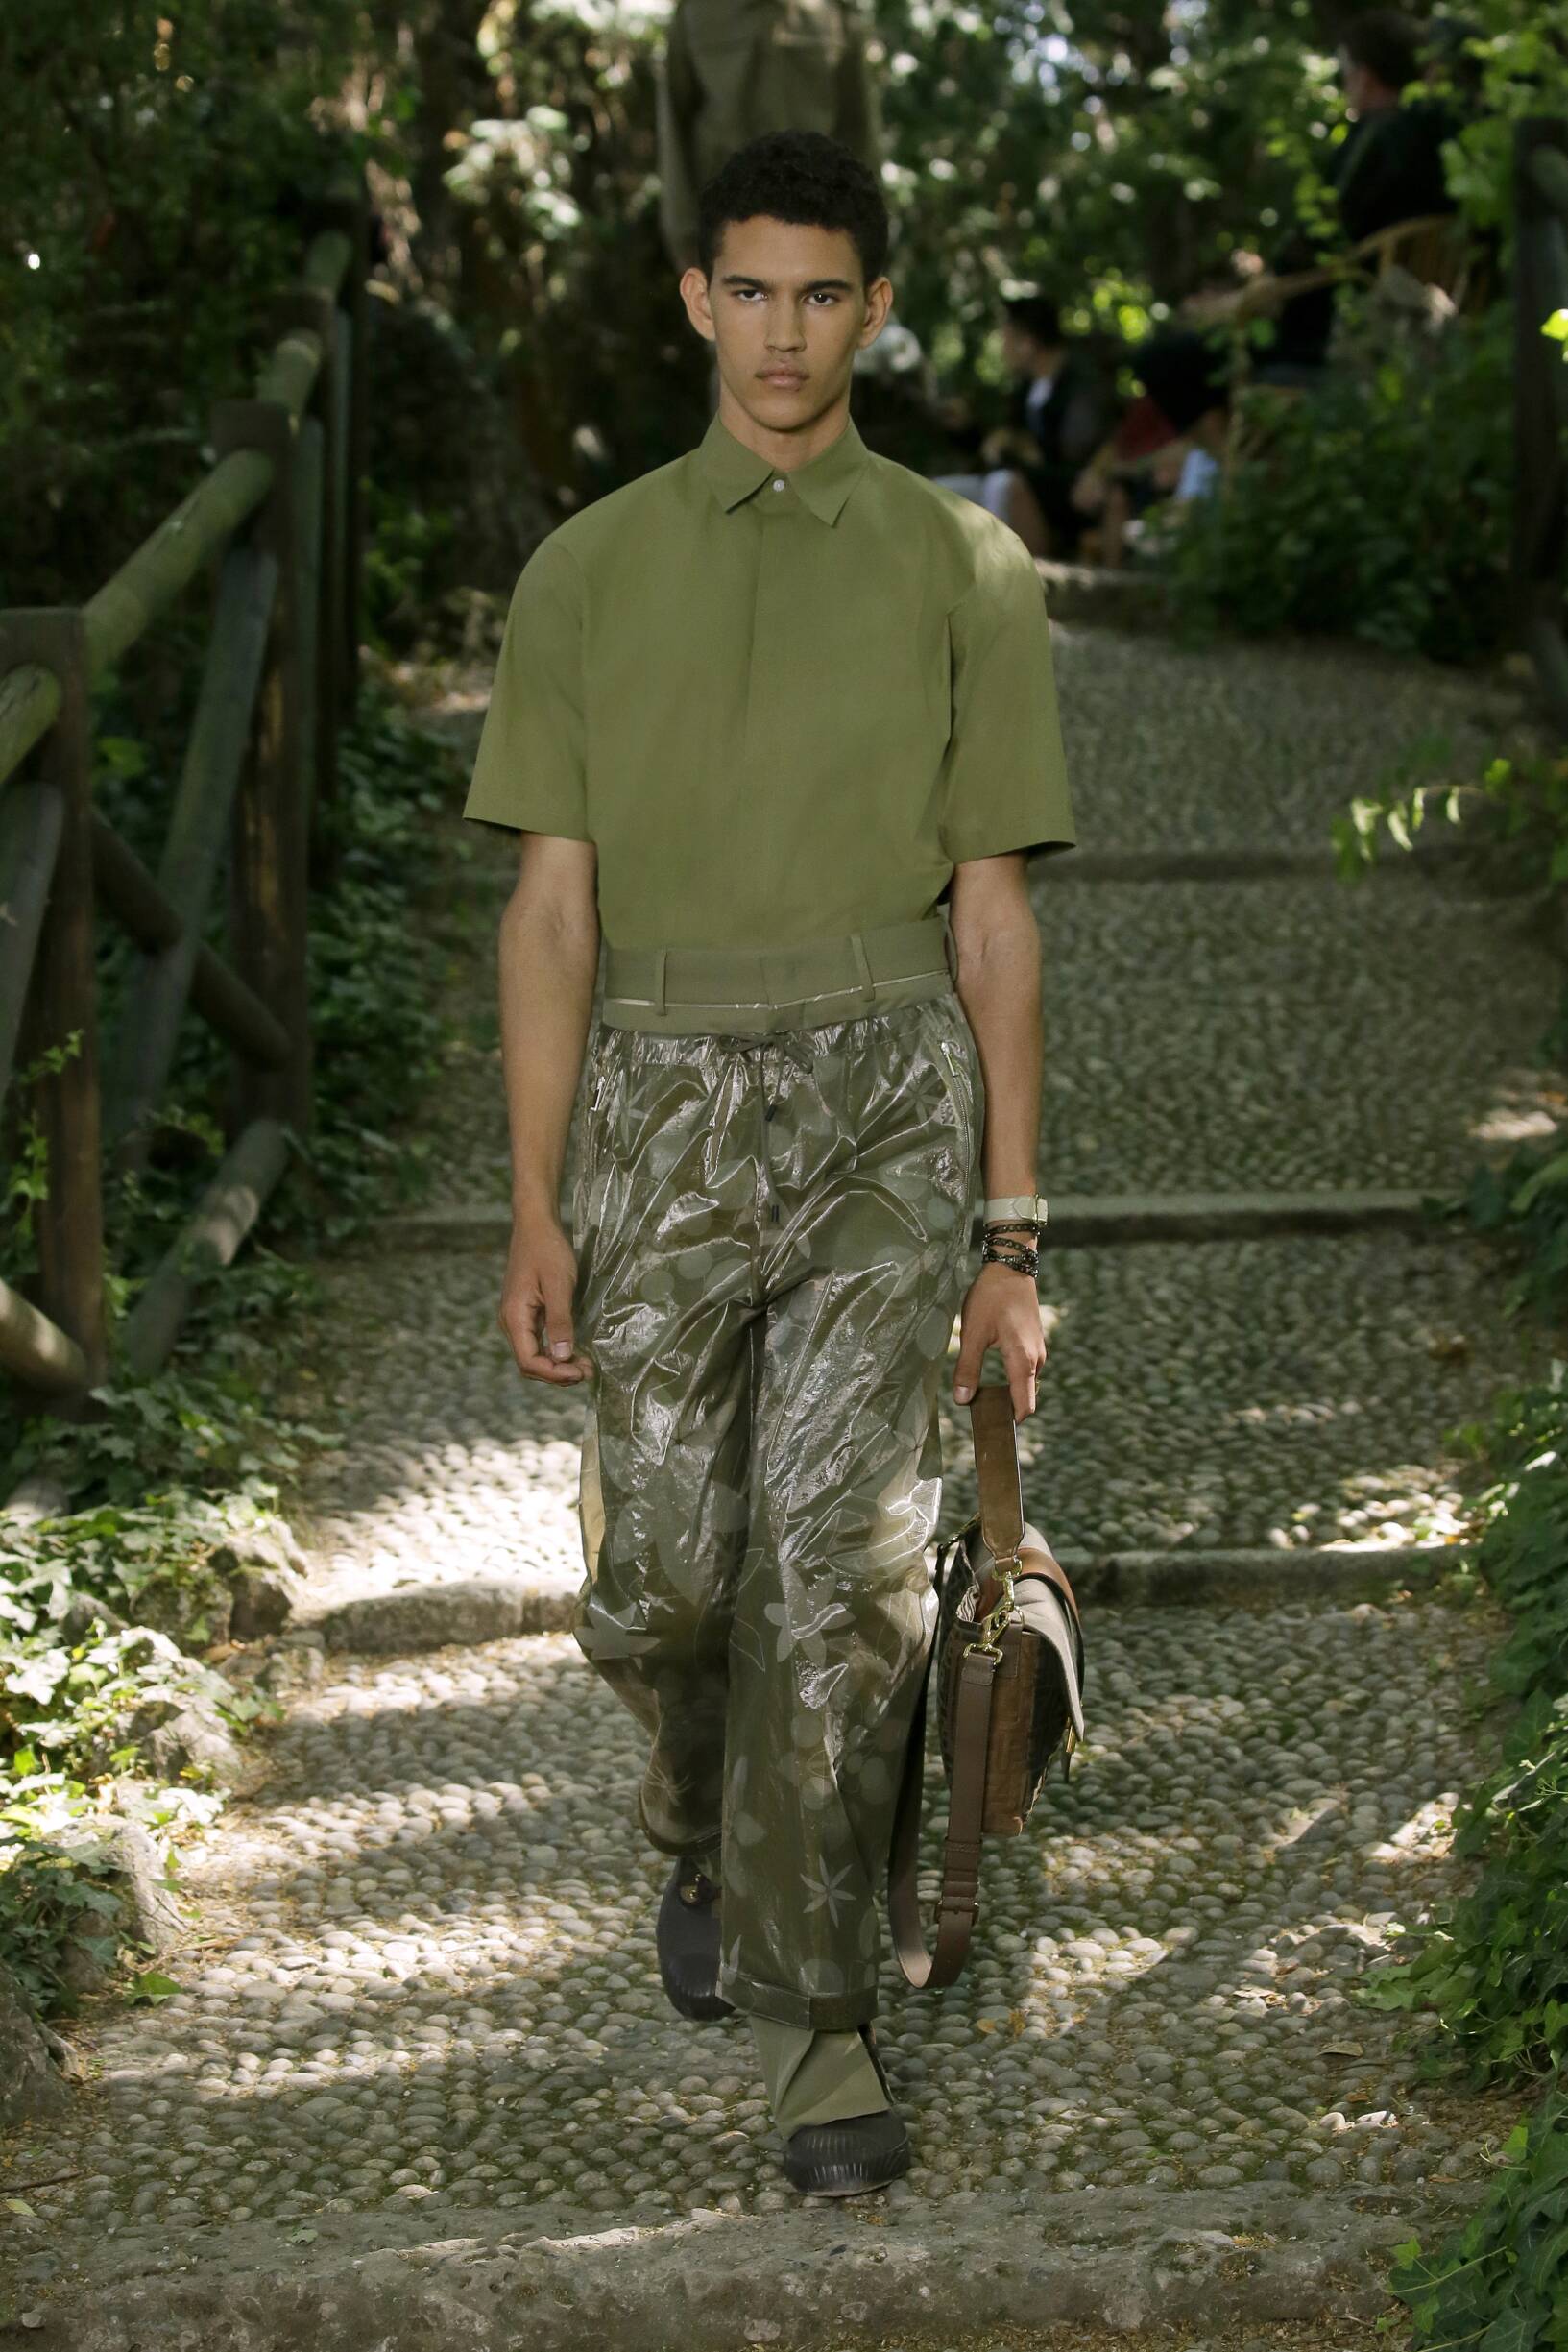 Man with White Nike Foam Shoes and Trousers with Butterflies Design before  Fendi Fashion Show, Milan Fashion Editorial Stock Image - Image of  trousers, shoes: 194561924